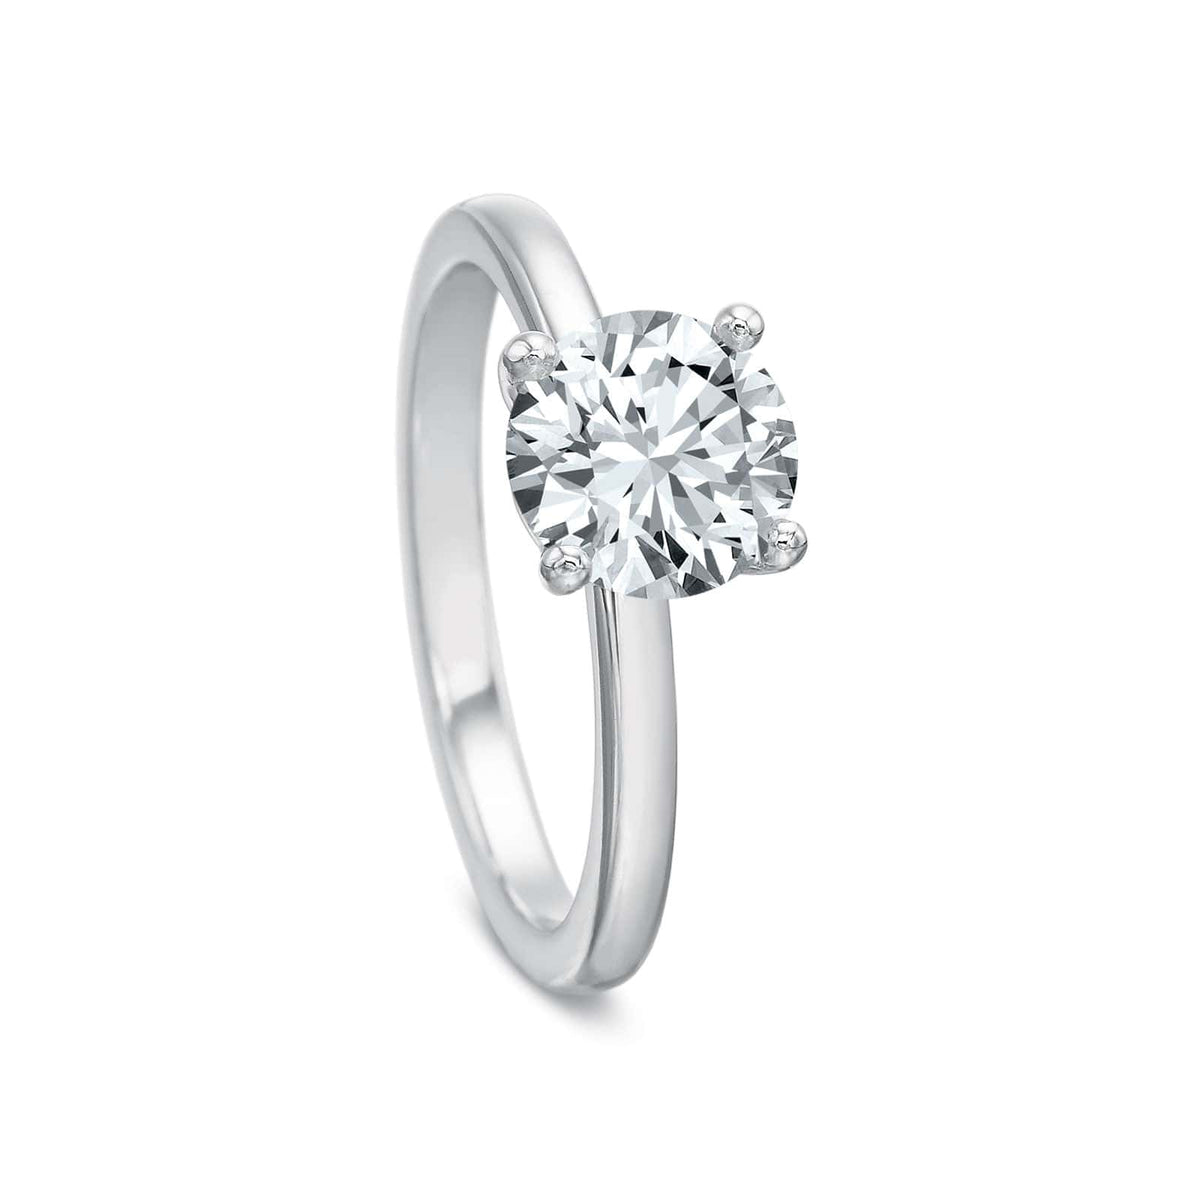 Platinum 4 Prong Solitaire Engagement Ring Setting